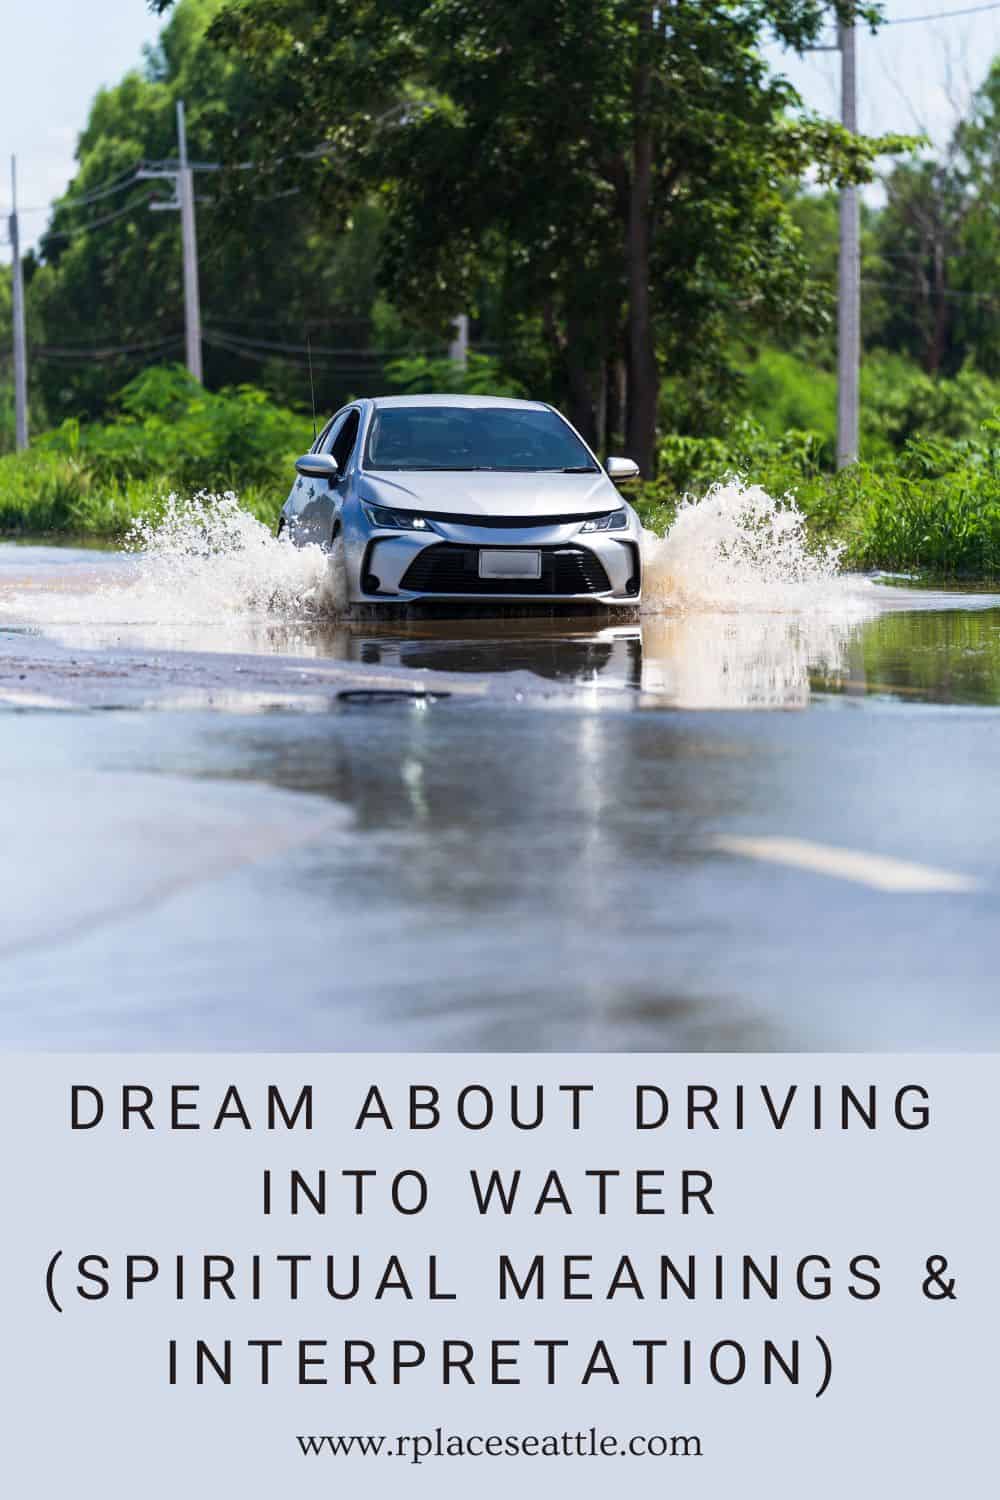 Dream About Driving Into Water (Spiritual Meanings & Interpretation)